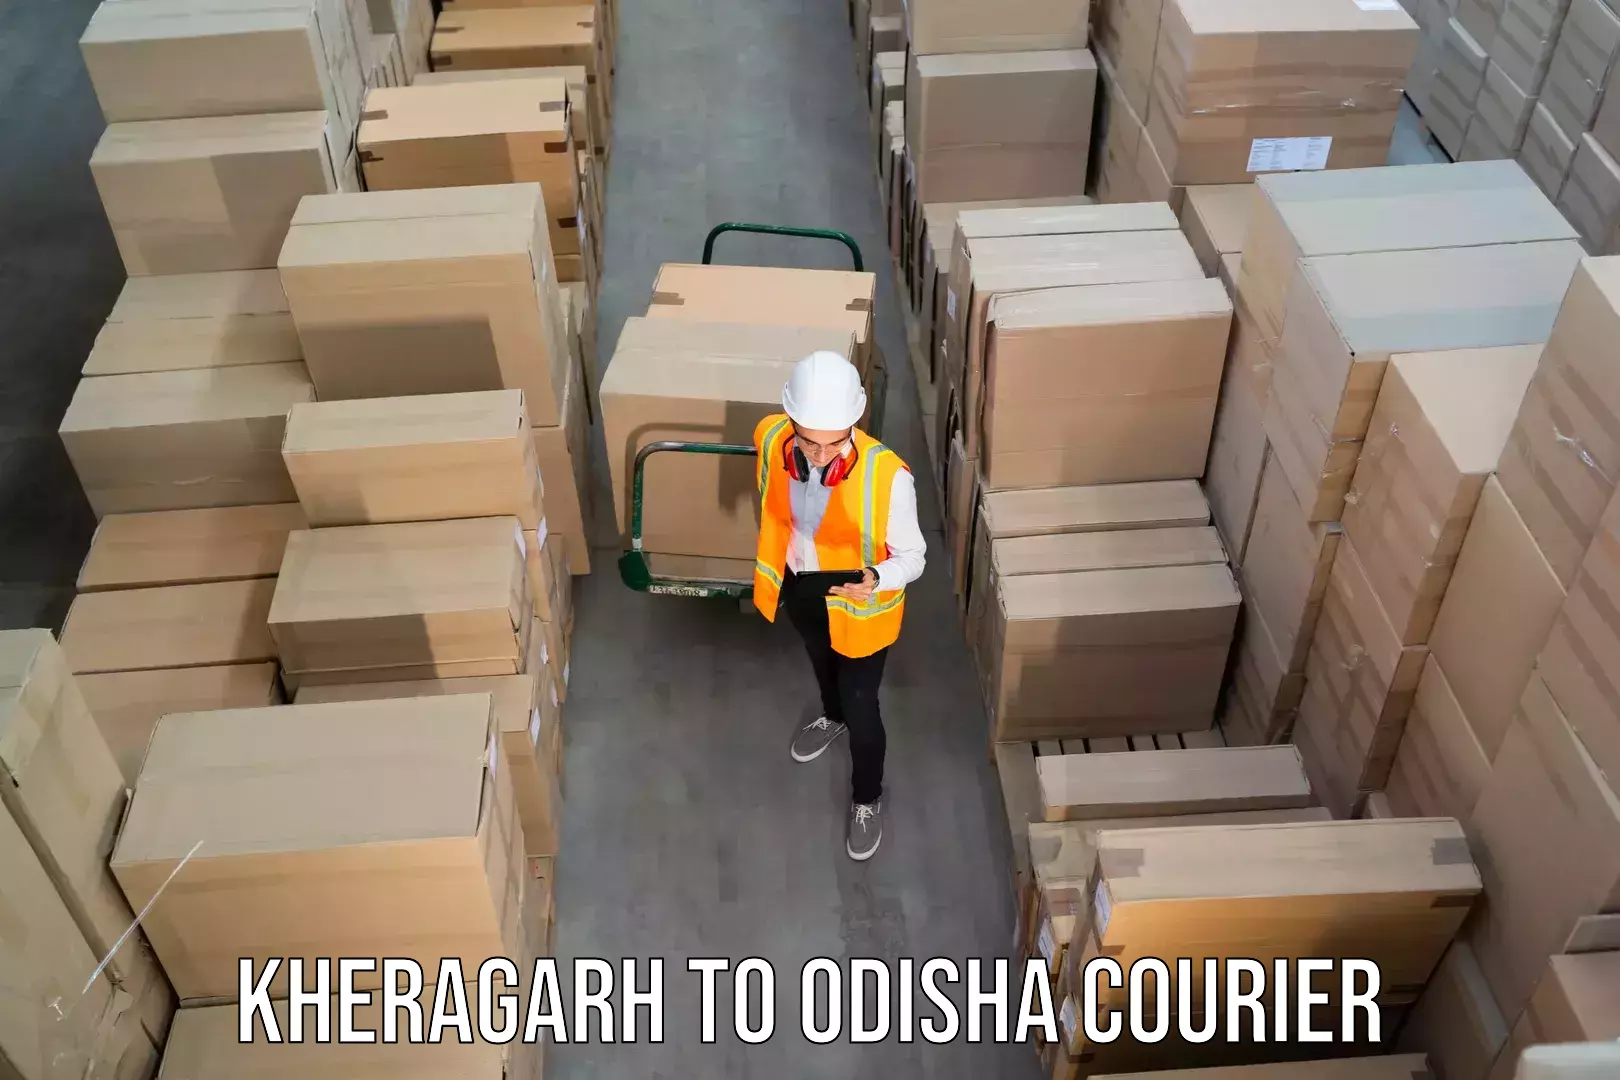 Reliable parcel services Kheragarh to Nabarangpur